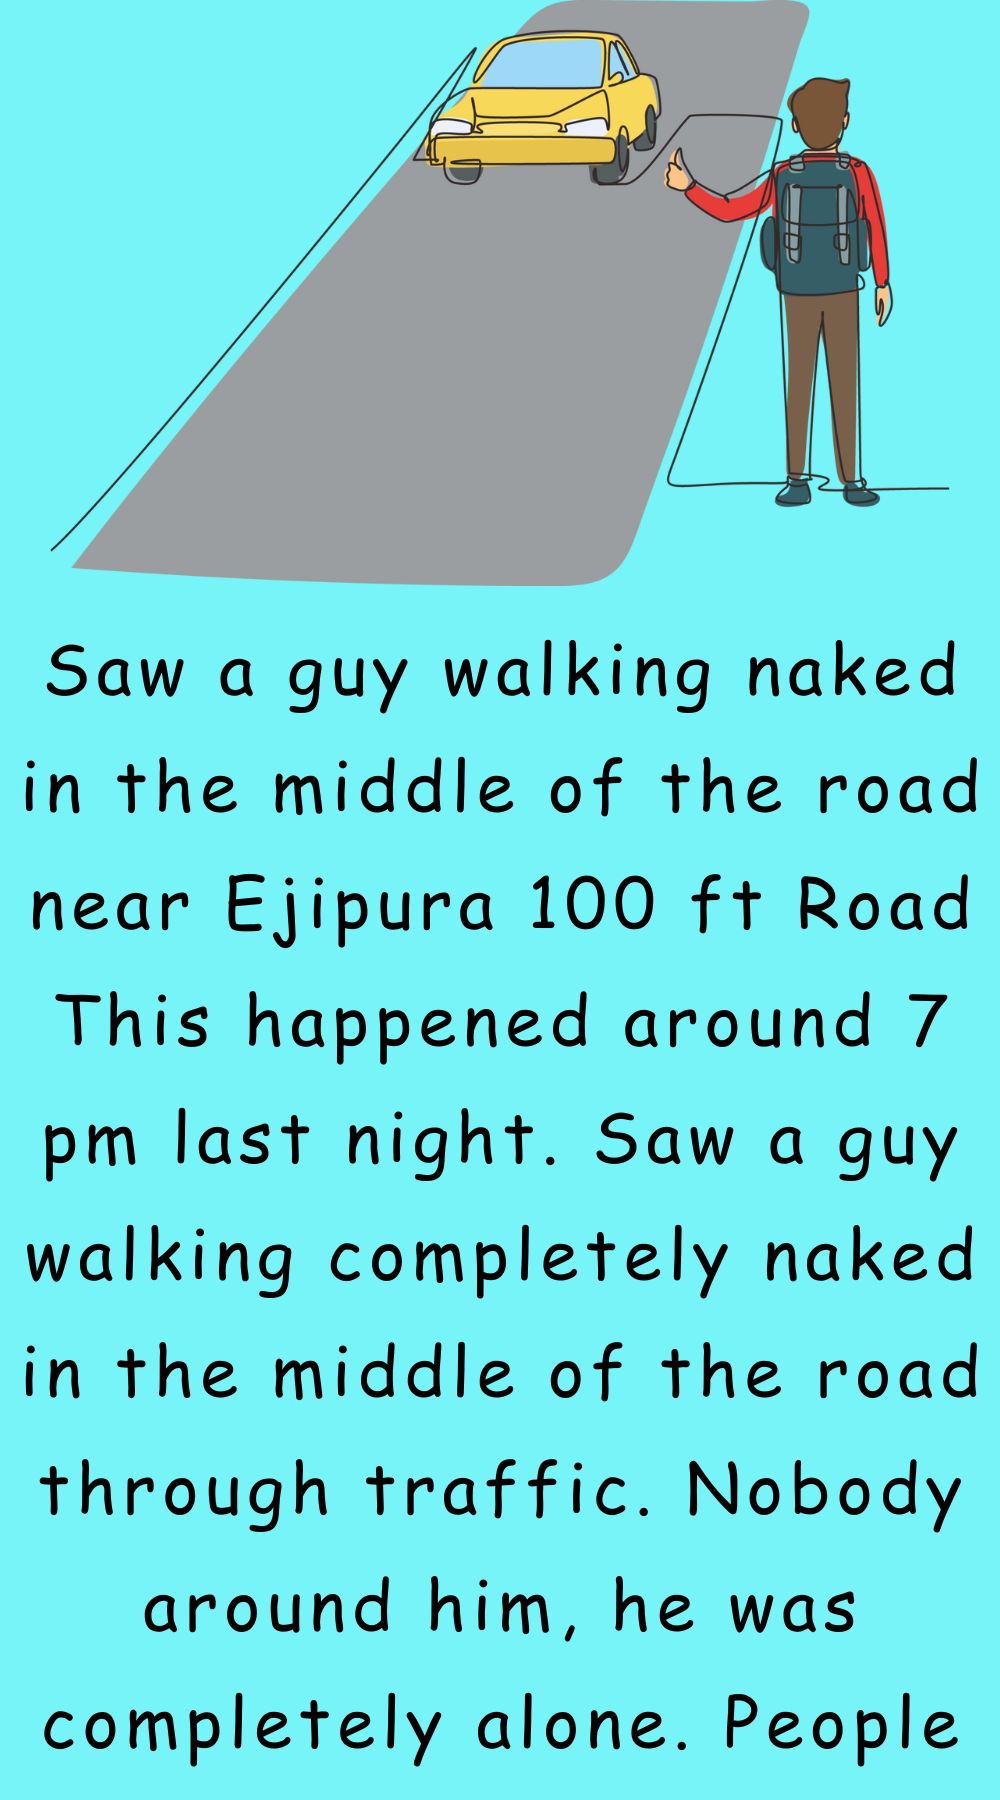 Saw a guy walking naked in the middle of the road 